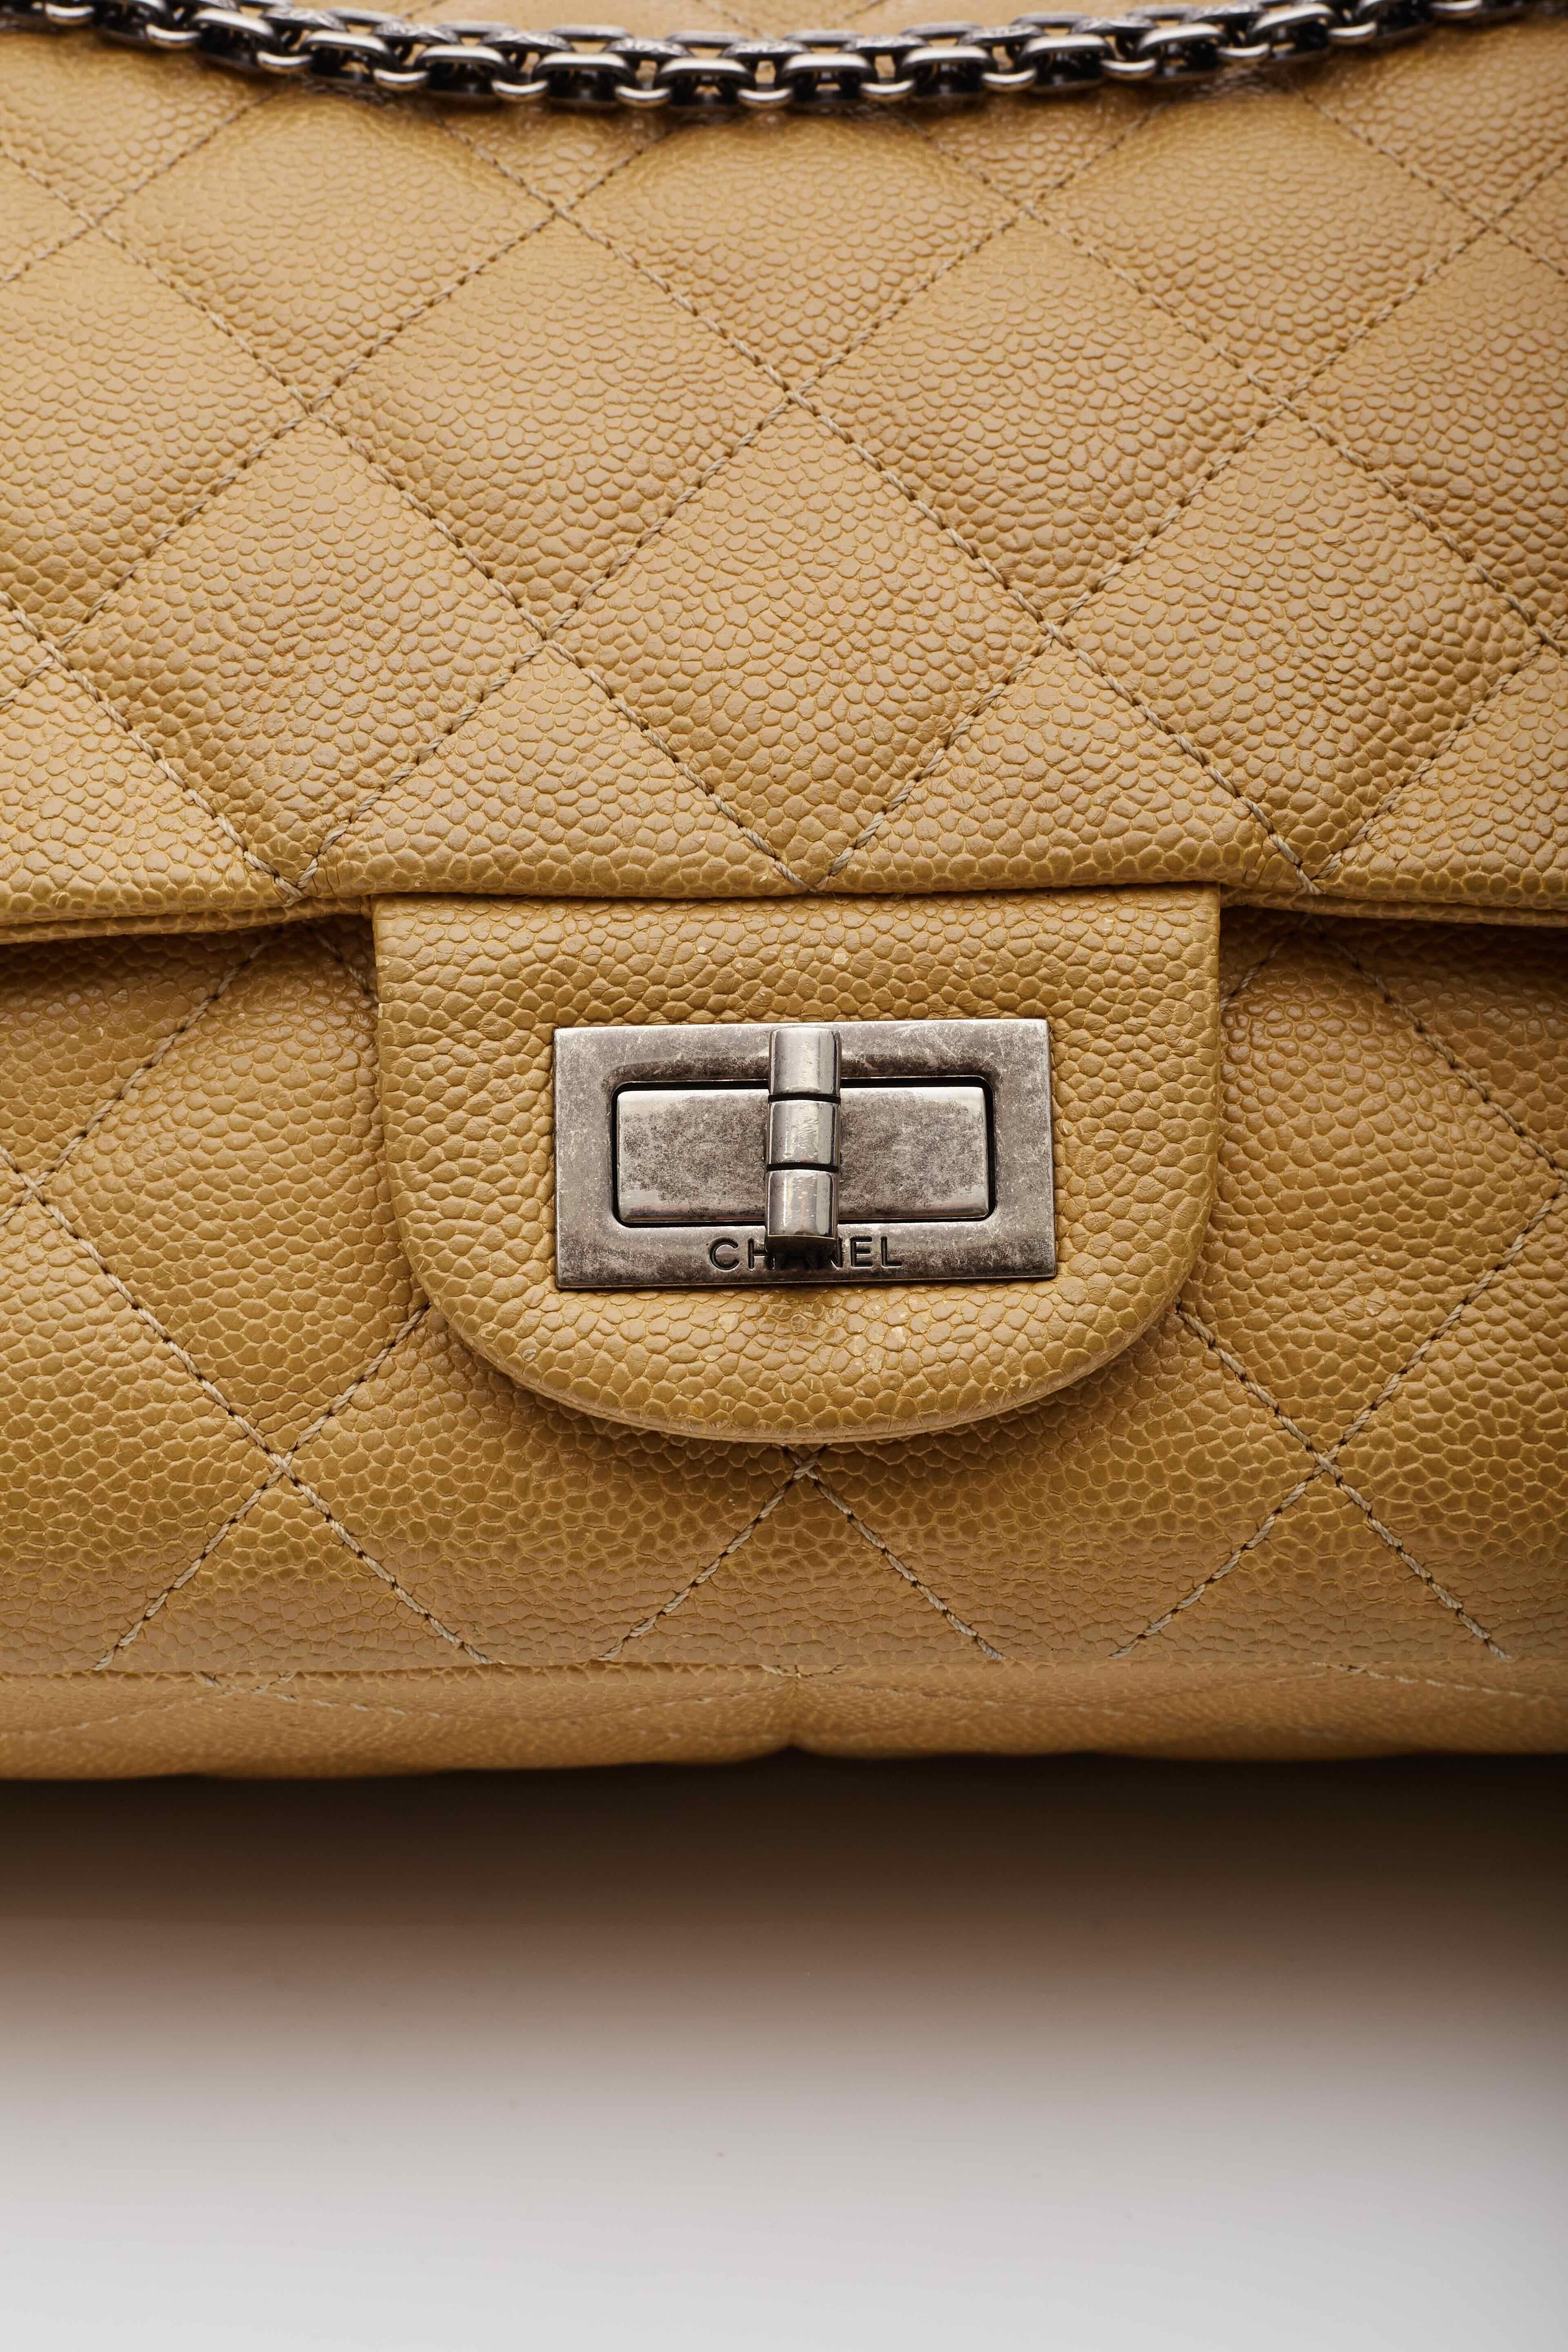 Chanel Caviar Leather 2.55 Reissue Maxi 227 Double Flap Bag For Sale 1